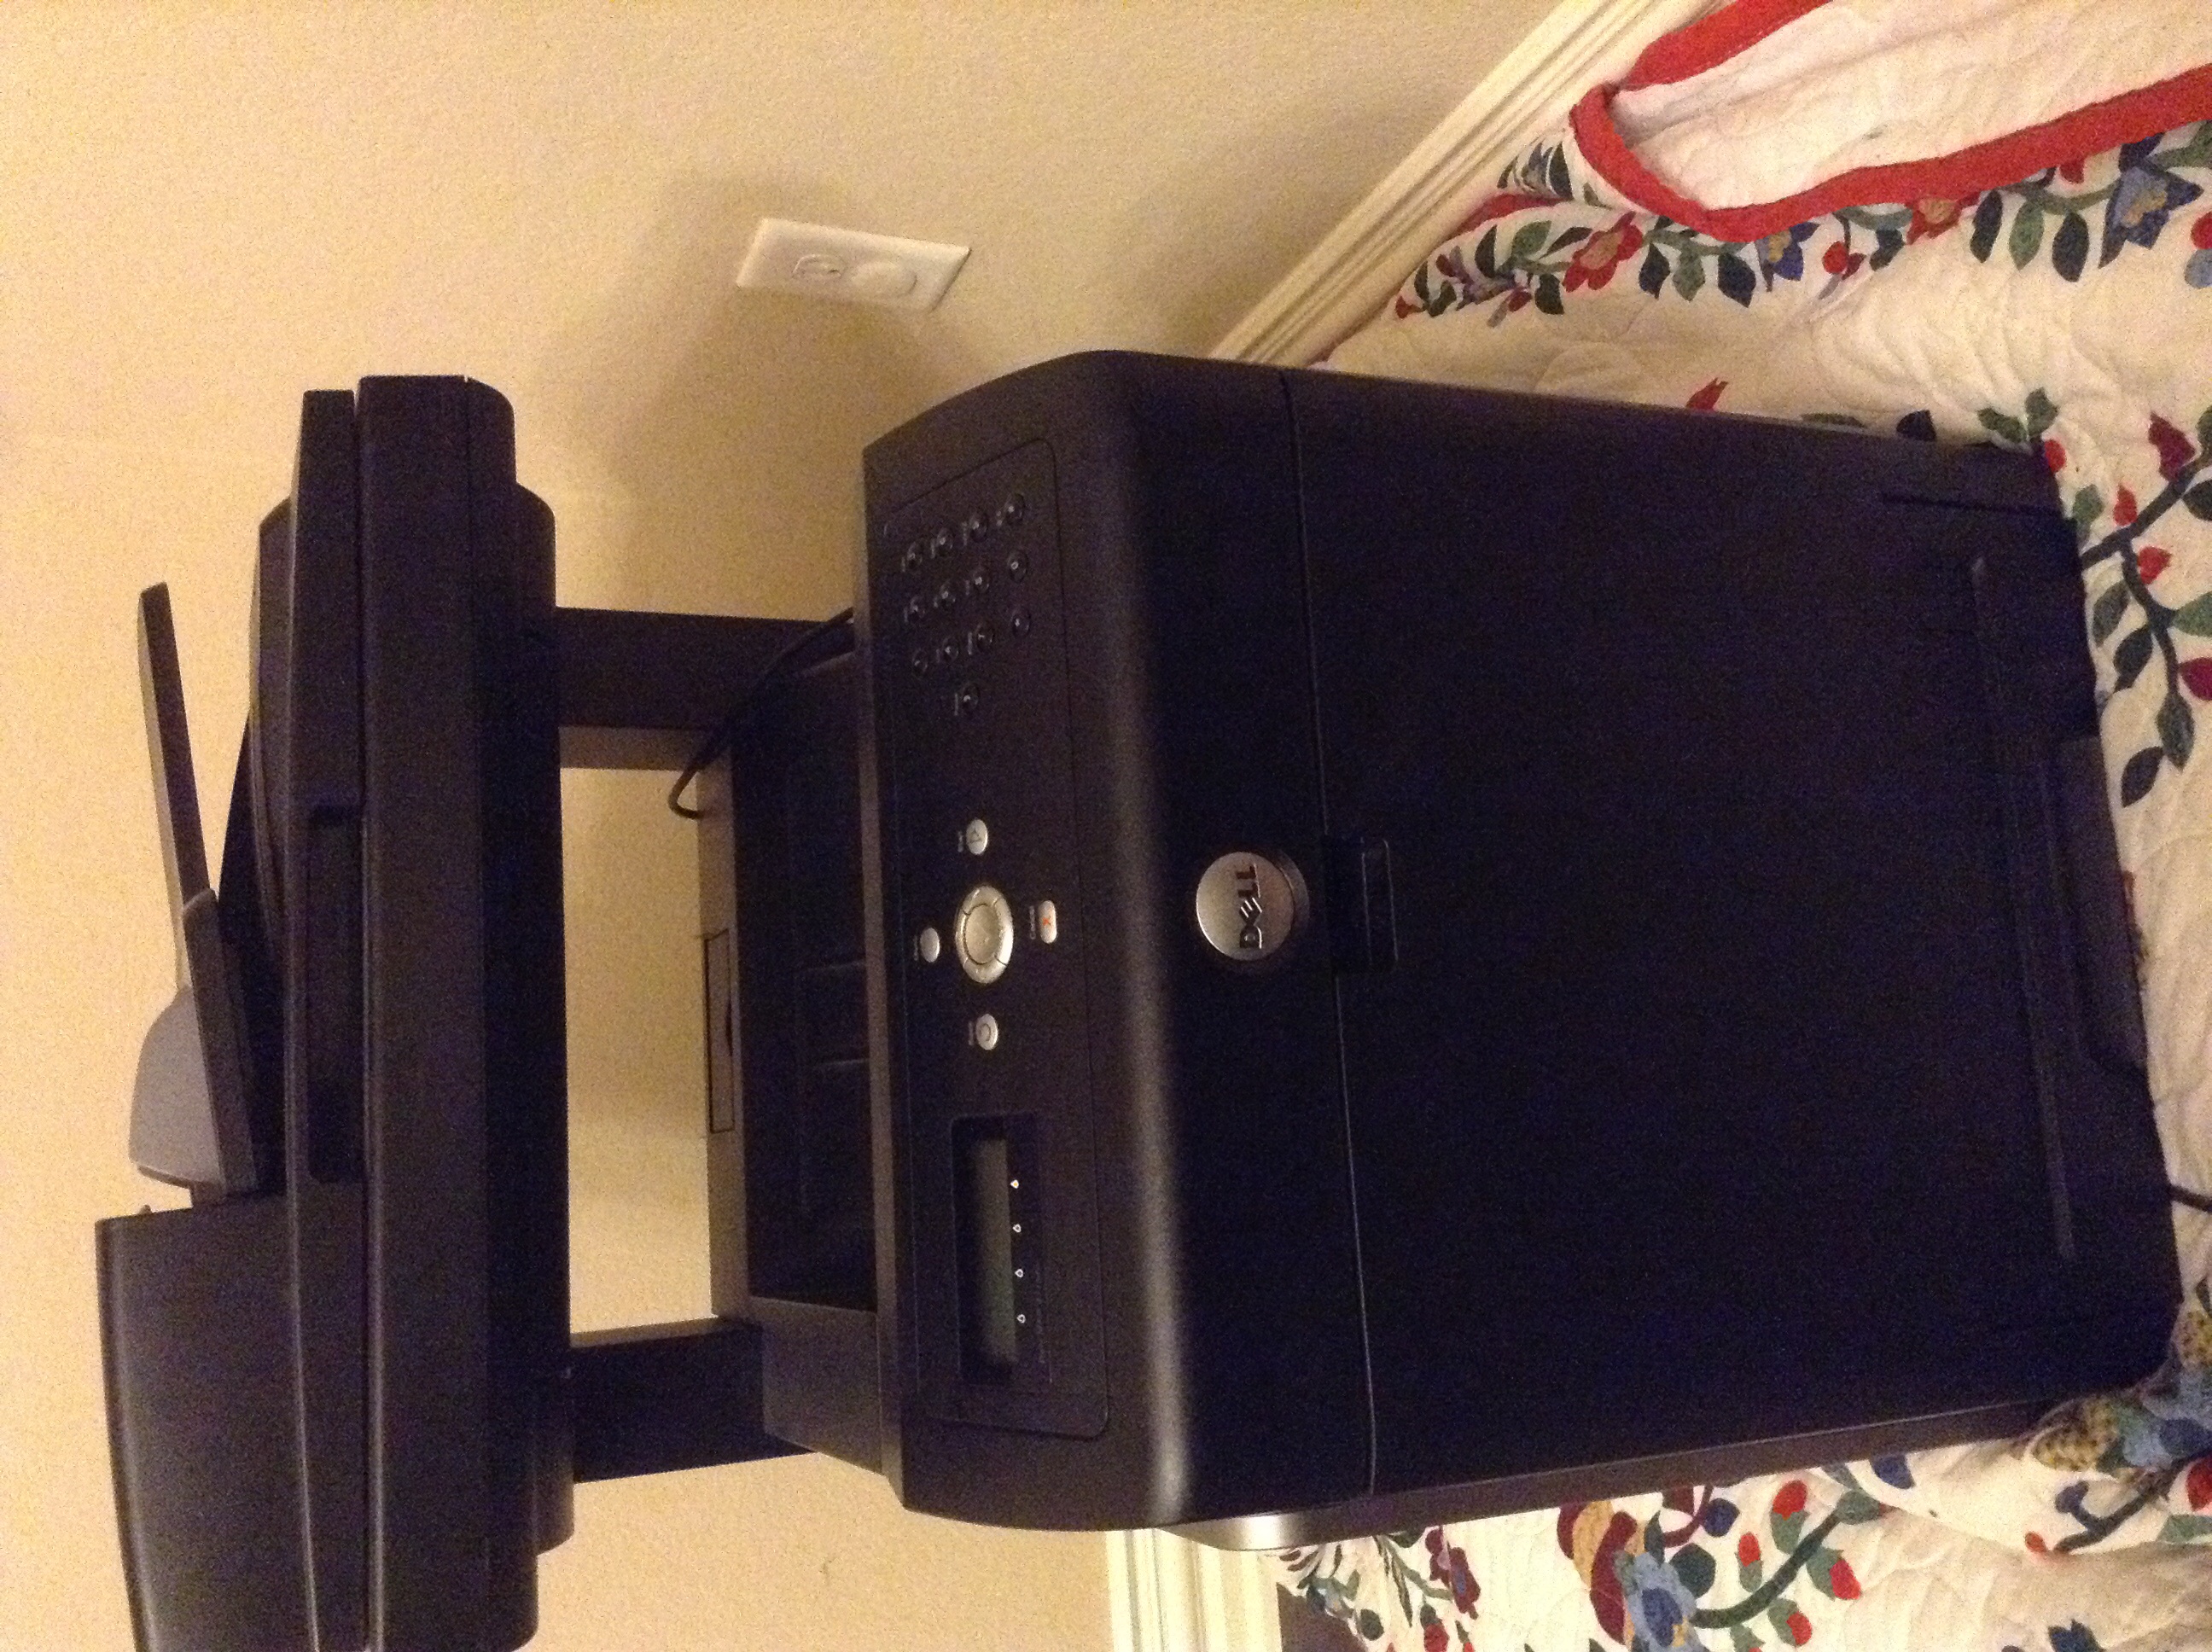 Dell all in one color laser printer scanner, copier, and fax